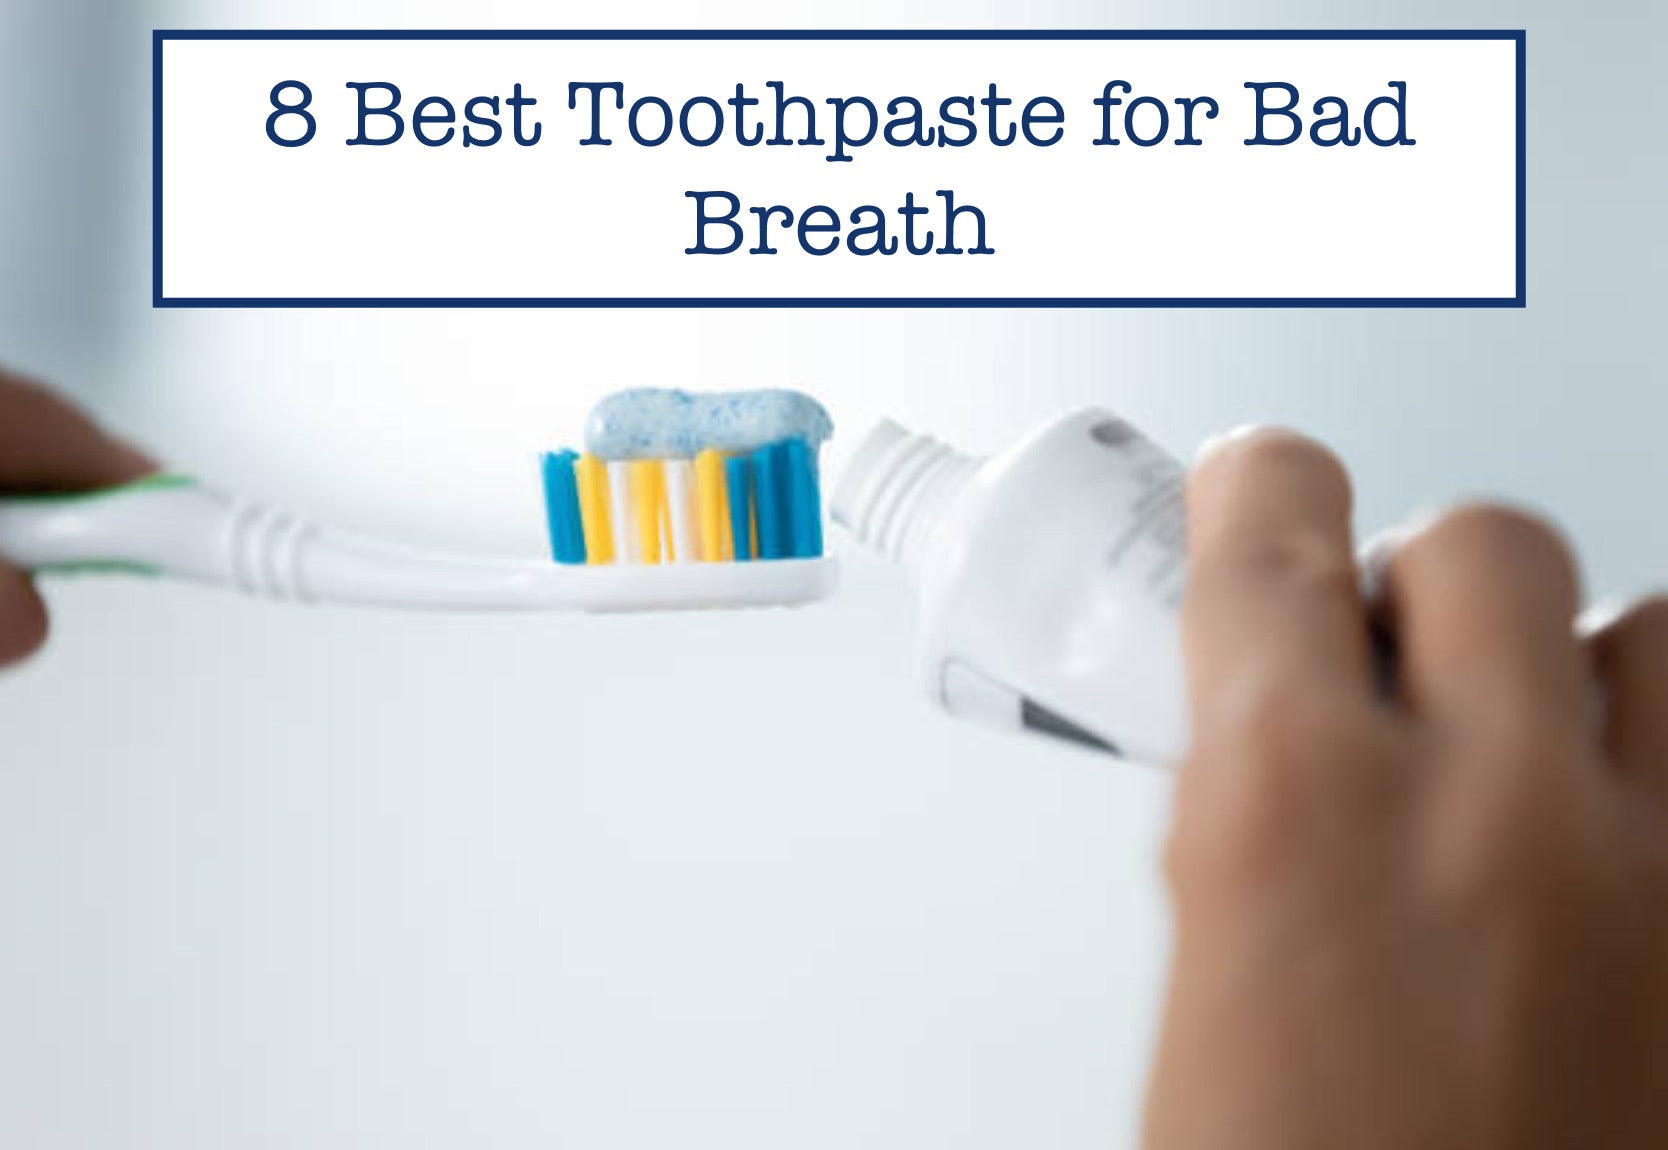 8 Best Toothpaste for Bad Breath